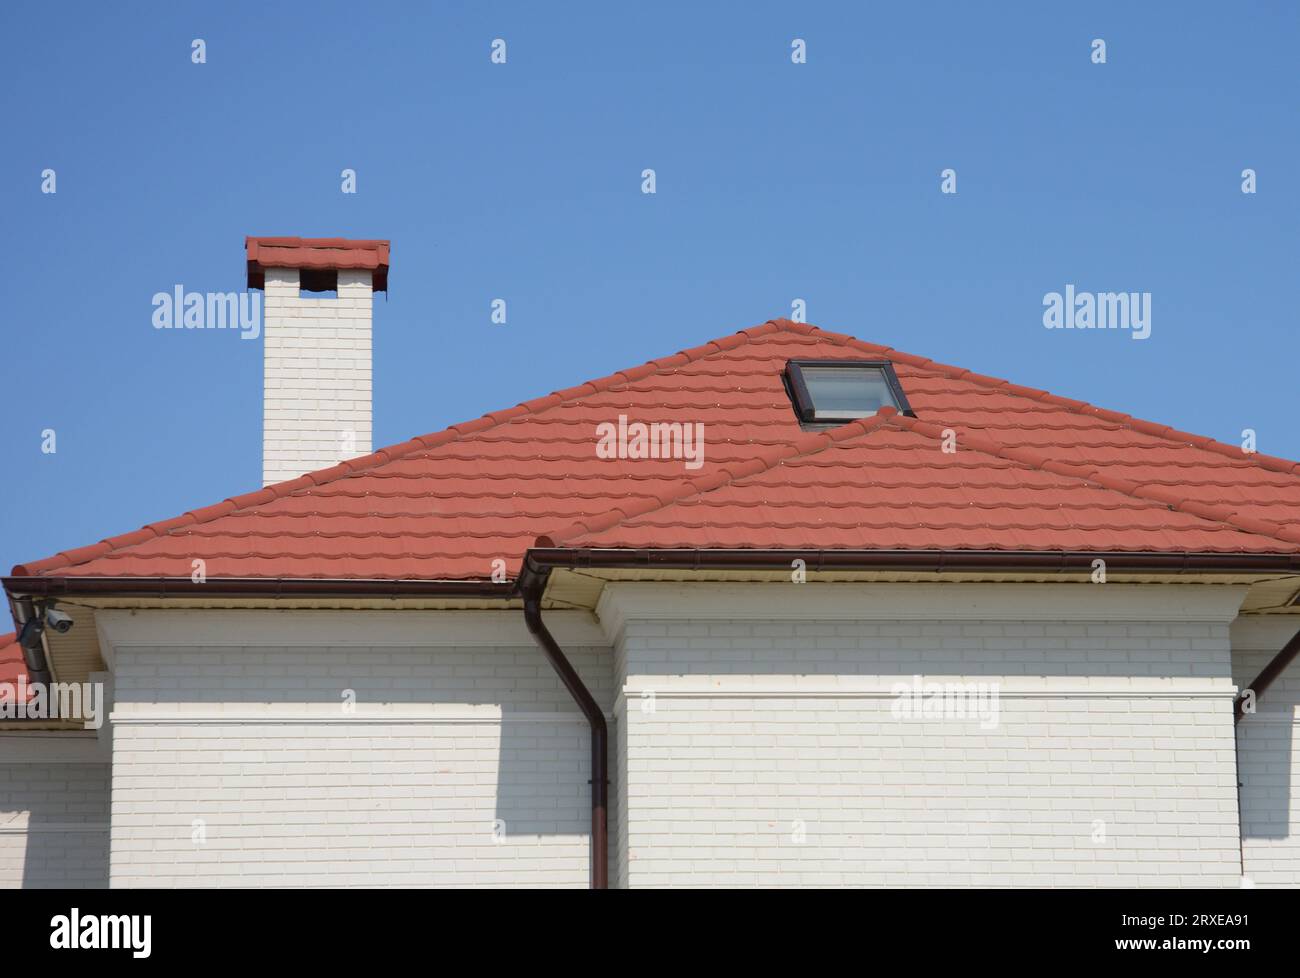 House red ceramic tiles rooftop with attic skylight window, rain gutter pipeline and white brick facade walls. Stock Photo